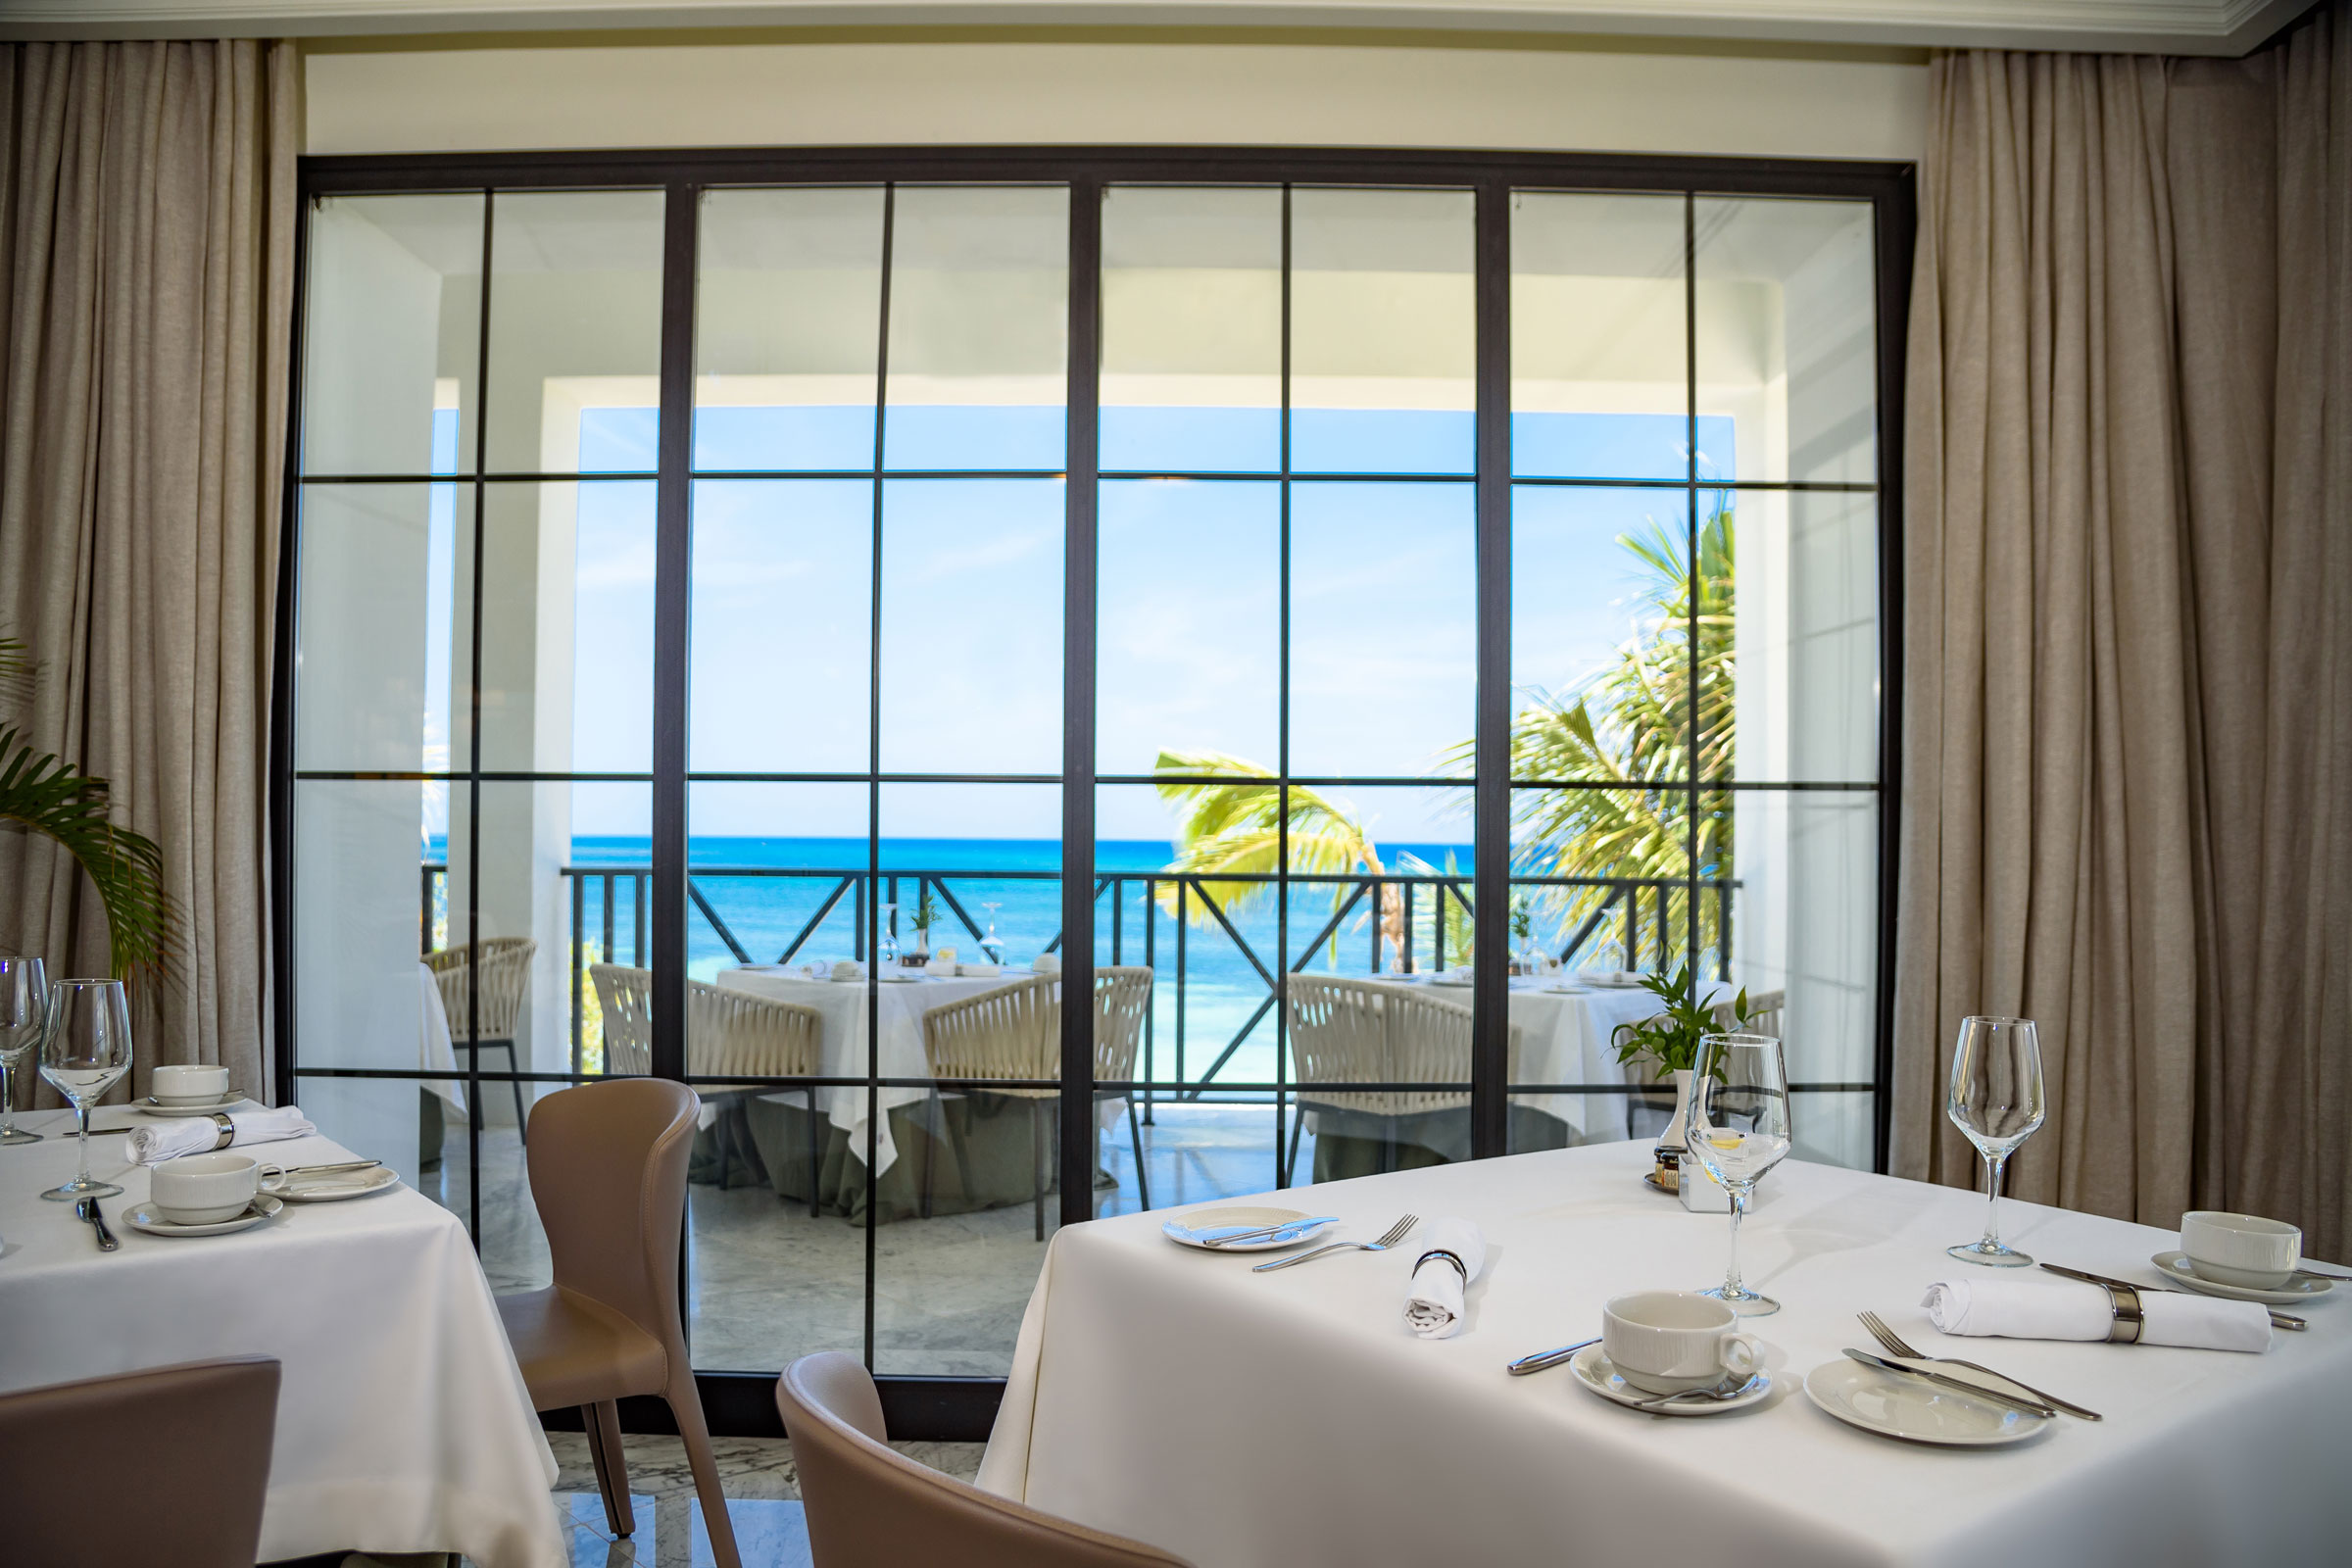 Zenith Restaurant at Excellence Oyster Bay with an incredible ocean view